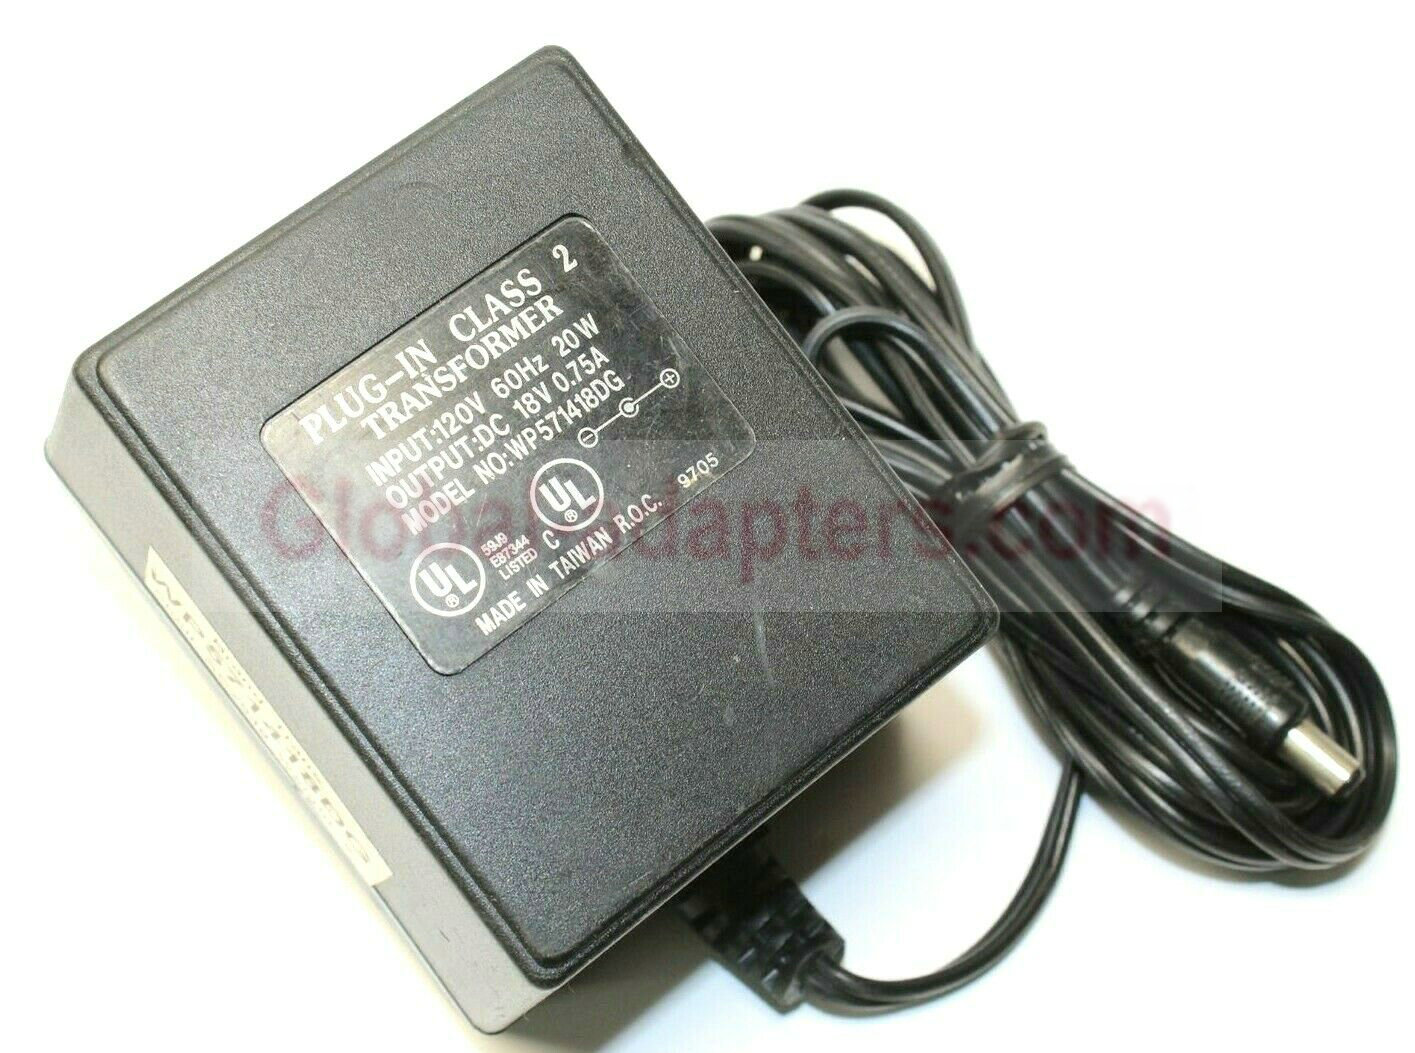 New 18V 0.75A WP571418DG Plug-In Class 2 Transformer Power Supply Ac Adapter